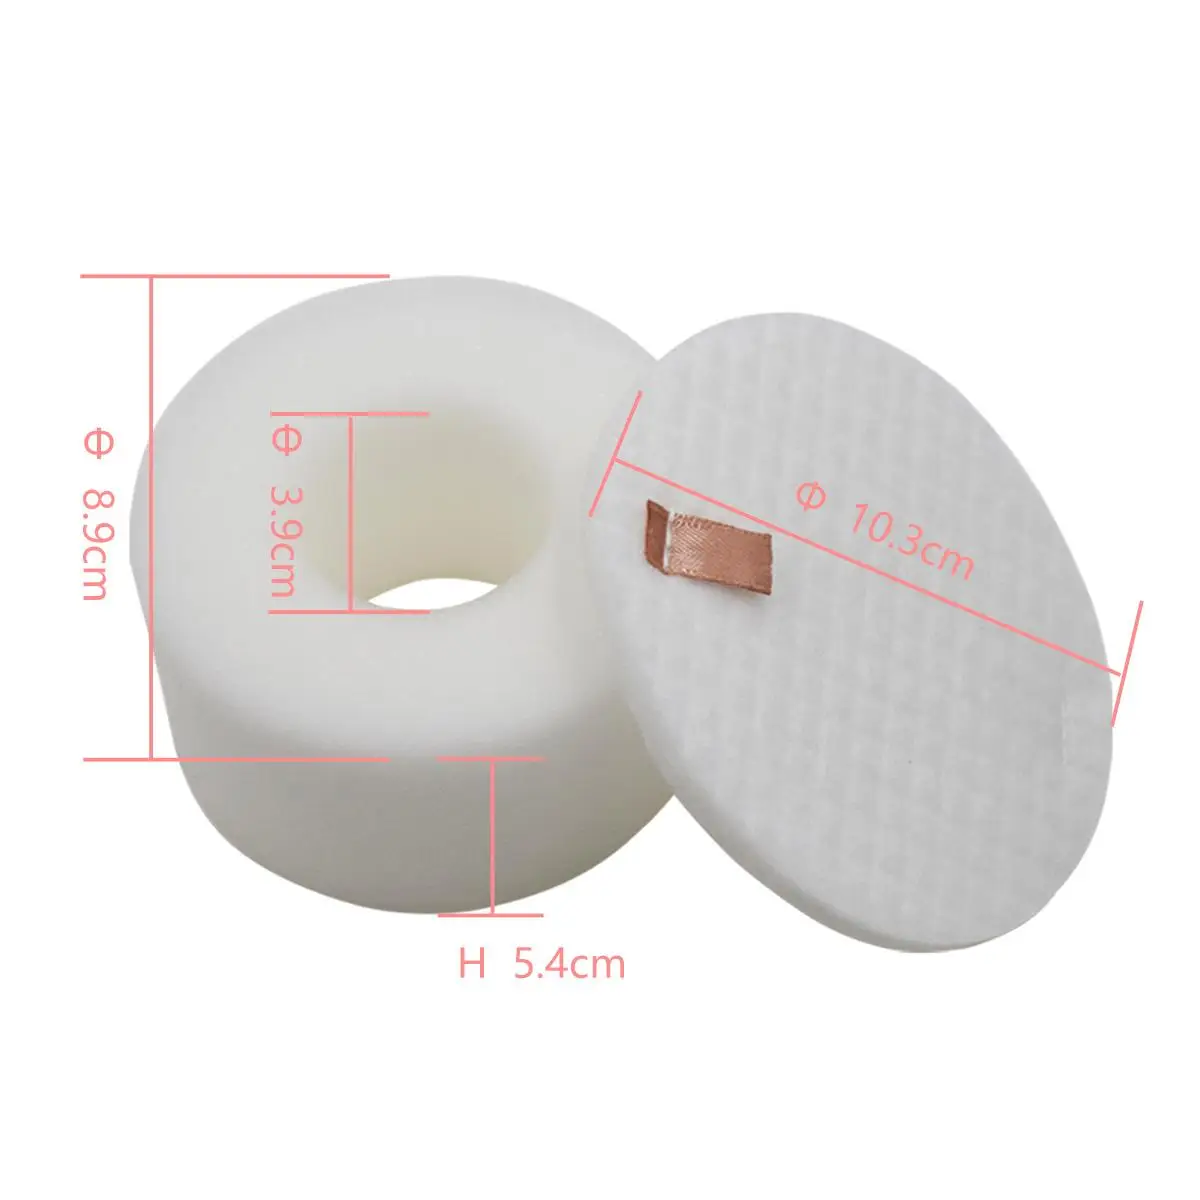 Accessory Vacuum Cleaner Parts Elements Filter For Shark NZ801UKT Anti Hair Wrap Duoclean Pet Sponges Tools Supply Useful